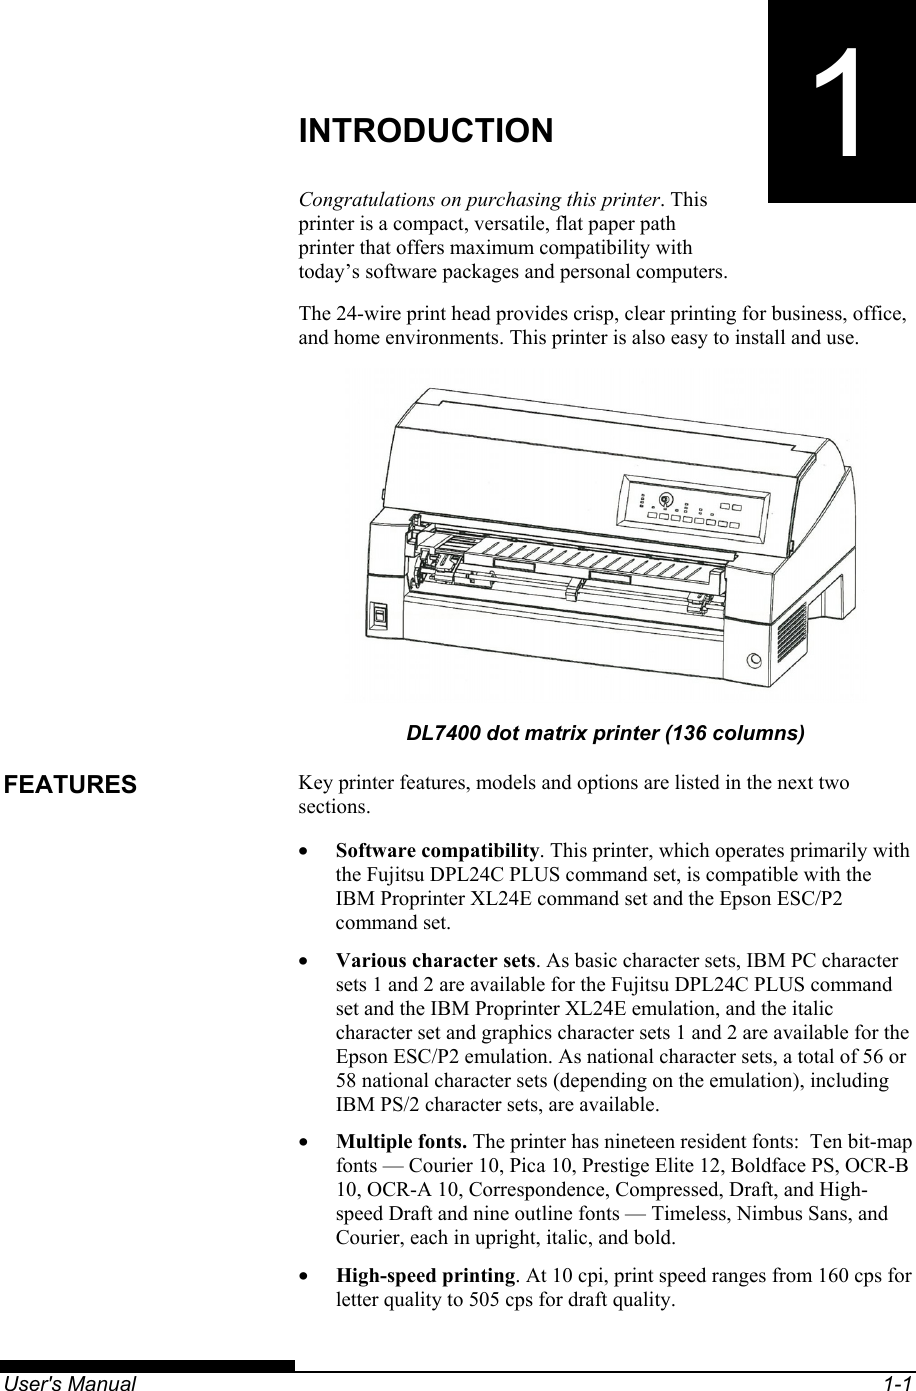   User&apos;s Manual  1-1 1 CHAPTER 1  INTRODUCTION INTRODUCTION Congratulations on purchasing this printer. This printer is a compact, versatile, flat paper path printer that offers maximum compatibility with today’s software packages and personal computers. The 24-wire print head provides crisp, clear printing for business, office, and home environments. This printer is also easy to install and use.  DL7400 dot matrix printer (136 columns) Key printer features, models and options are listed in the next two sections. •  Software compatibility. This printer, which operates primarily with the Fujitsu DPL24C PLUS command set, is compatible with the IBM Proprinter XL24E command set and the Epson ESC/P2 command set. •  Various character sets. As basic character sets, IBM PC character sets 1 and 2 are available for the Fujitsu DPL24C PLUS command set and the IBM Proprinter XL24E emulation, and the italic character set and graphics character sets 1 and 2 are available for the Epson ESC/P2 emulation. As national character sets, a total of 56 or 58 national character sets (depending on the emulation), including IBM PS/2 character sets, are available. •  Multiple fonts. The printer has nineteen resident fonts:  Ten bit-map fonts — Courier 10, Pica 10, Prestige Elite 12, Boldface PS, OCR-B 10, OCR-A 10, Correspondence, Compressed, Draft, and High-speed Draft and nine outline fonts — Timeless, Nimbus Sans, and Courier, each in upright, italic, and bold. •  High-speed printing. At 10 cpi, print speed ranges from 160 cps for letter quality to 505 cps for draft quality. FEATURES 